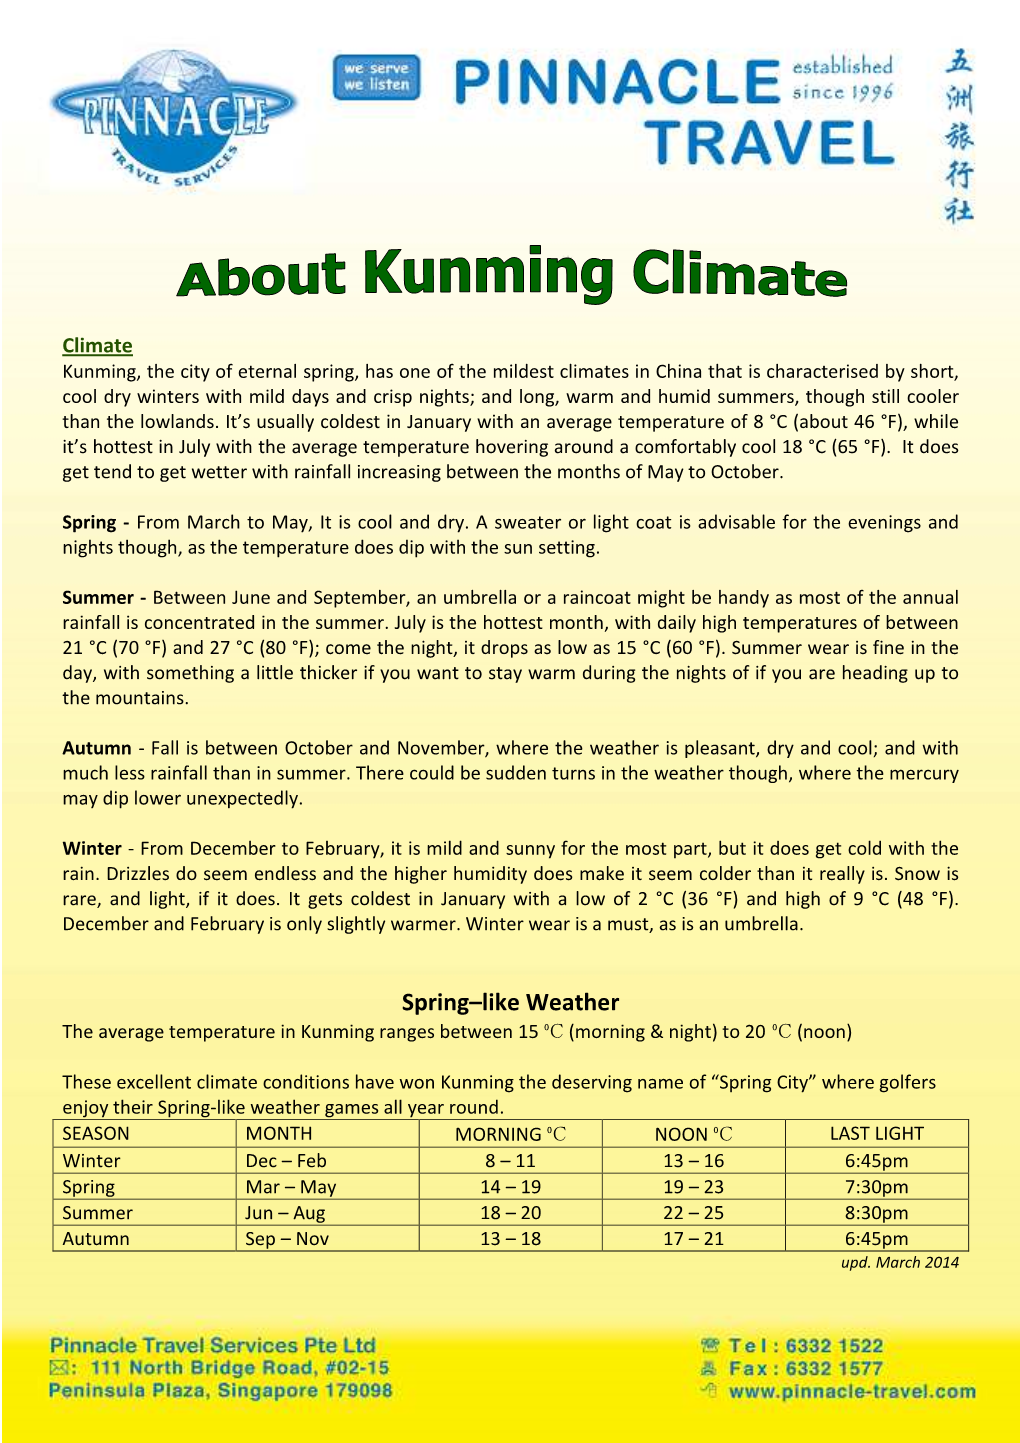 Spring–Like Weather the Average Temperature in Kunming Ranges Between 15 ºC (Morning & Night) to 20 ºC (Noon)